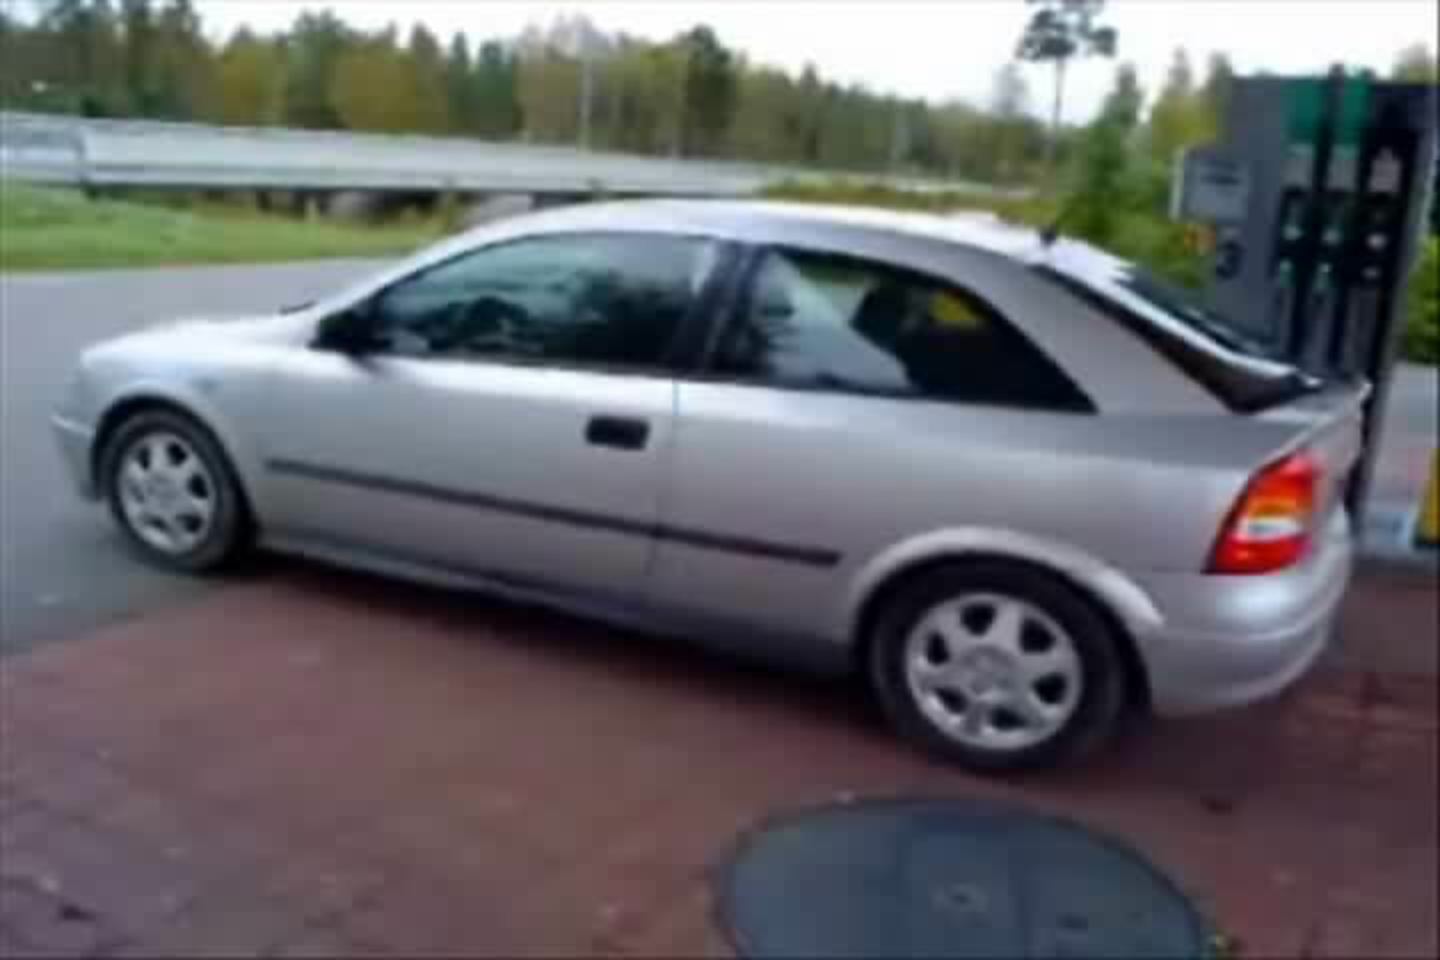 Opel astra 1.6 sport (842 comments) Views 33264 Rating 34